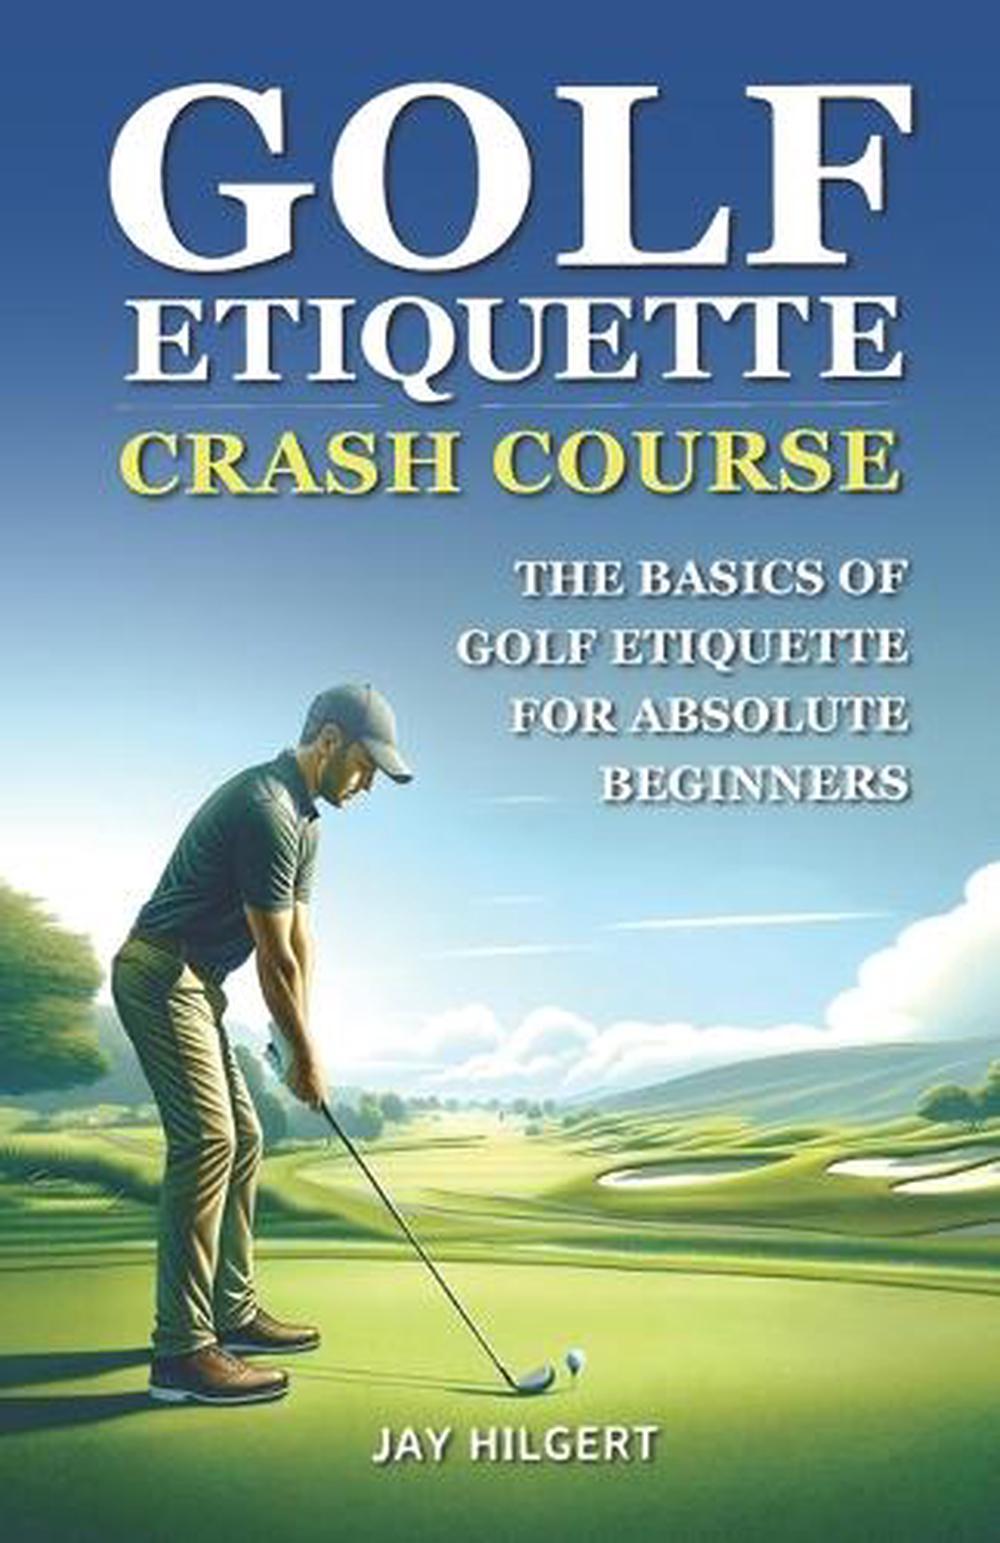 Golf Etiquette Crash Course: The Basics of Golf Etiquette for Absolute Beginners - Photo 1/1